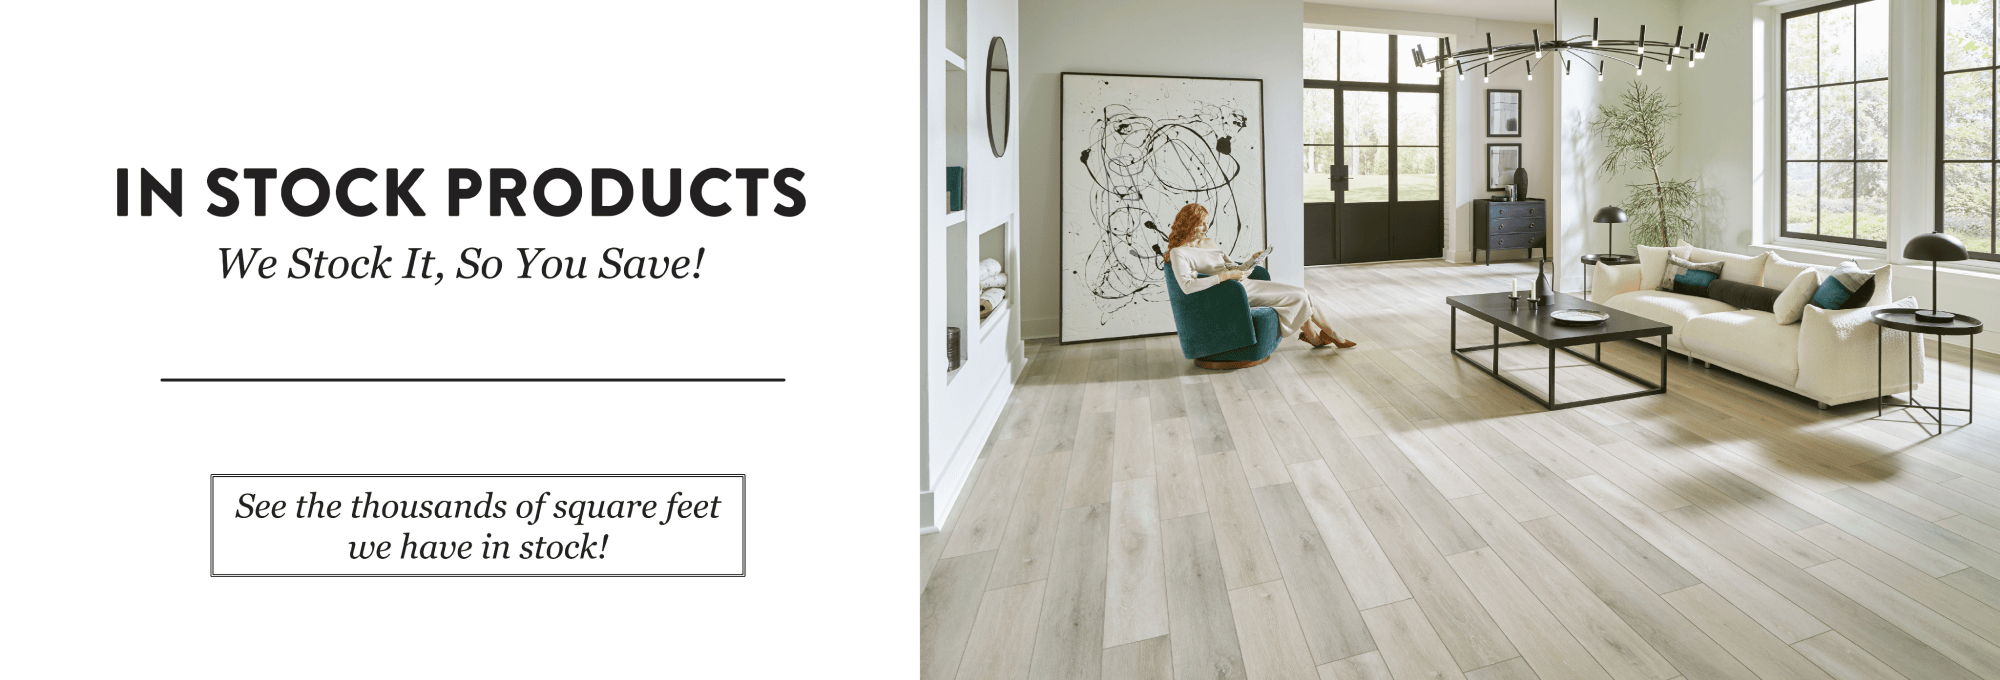 Floors USA | Wide variety of in-stock products |Serving the King of Prussia, PA area